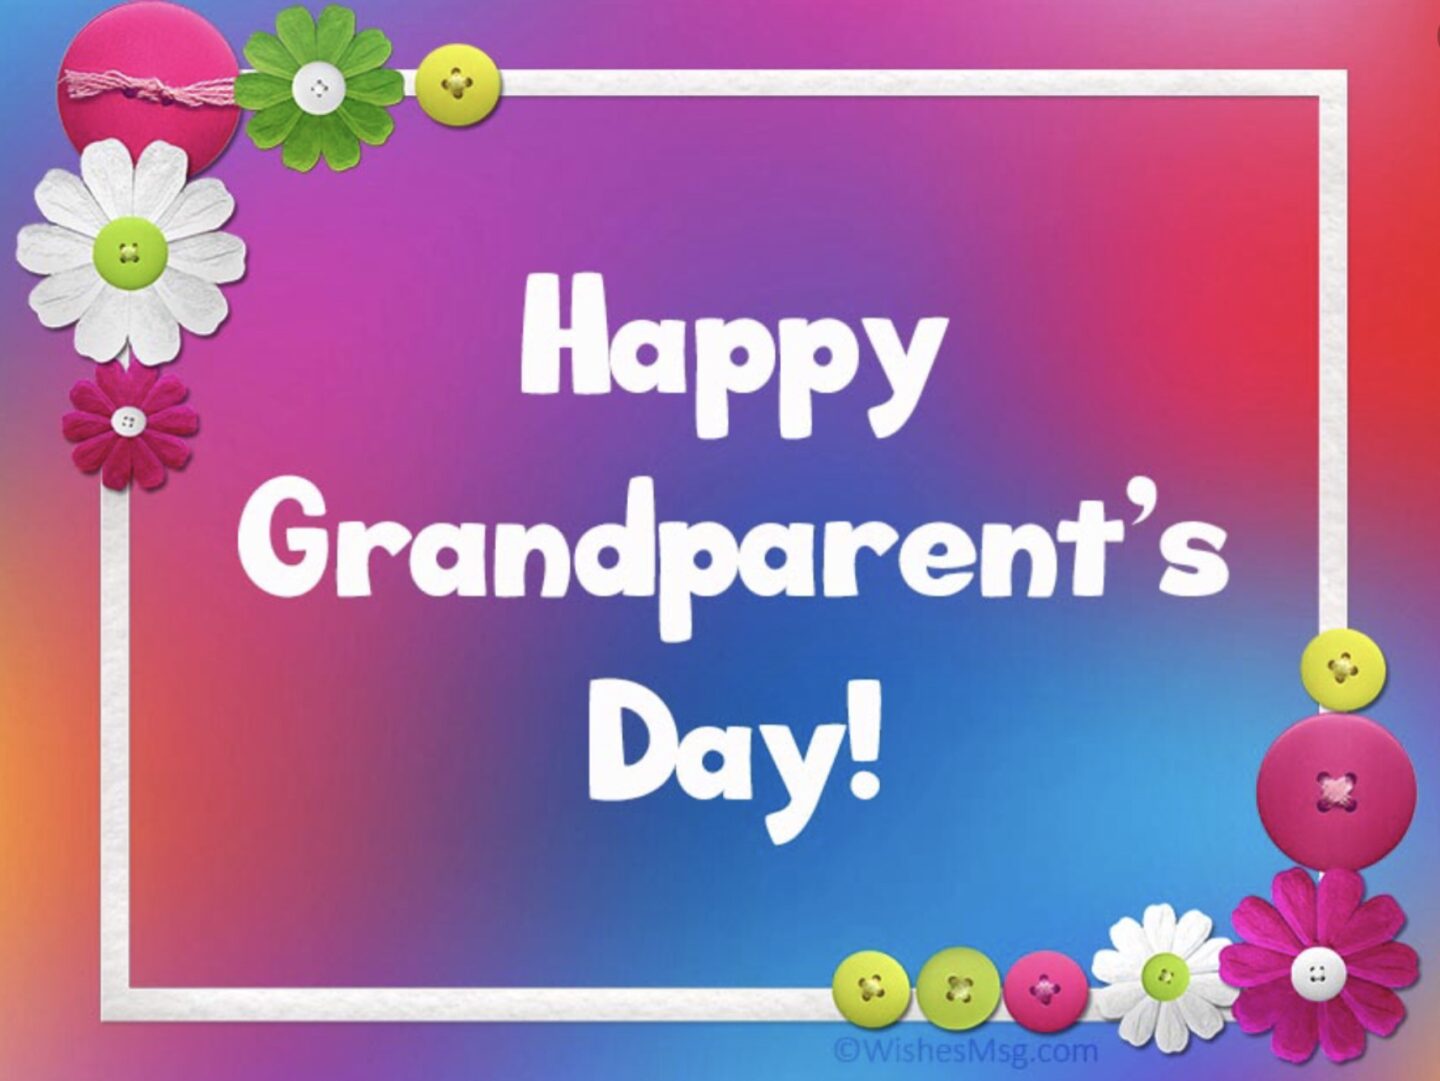 GRANDPARENTS DAY 3rd OCTOBER 2021